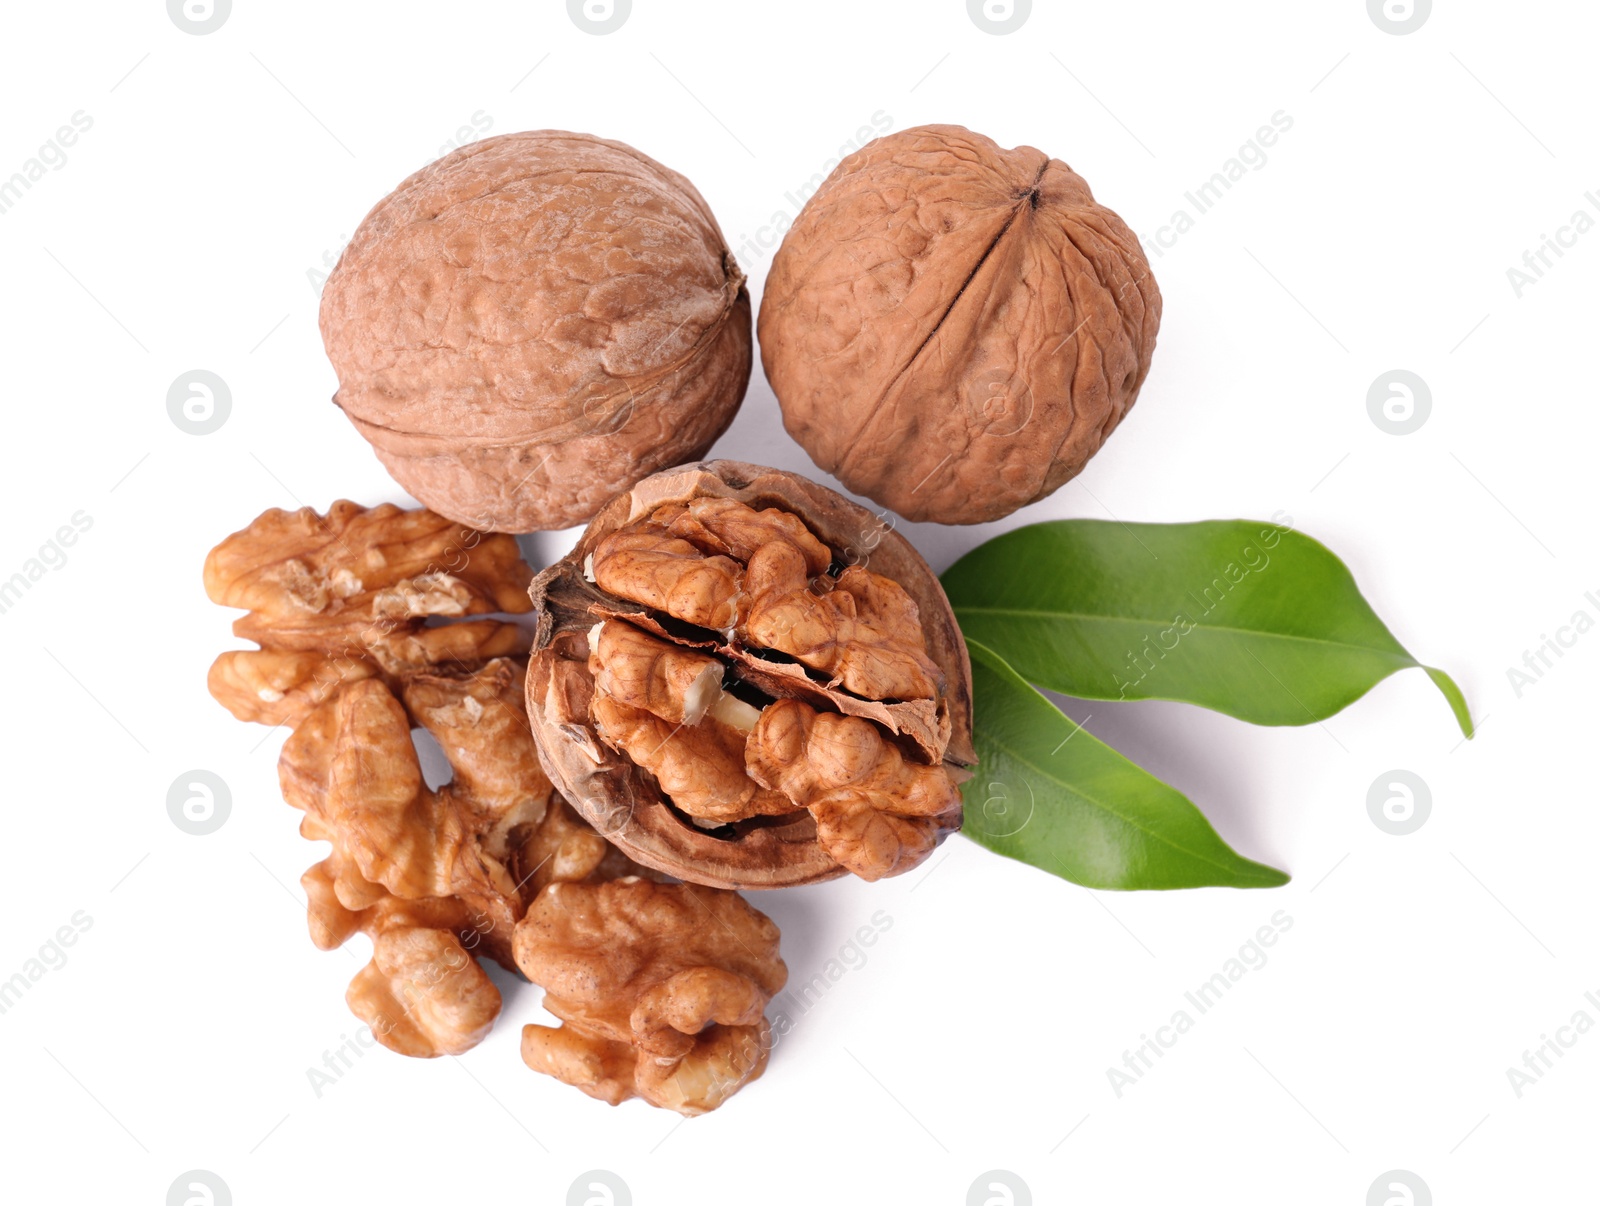 Photo of Walnuts in shell, kernels and green leaves on white background, top view